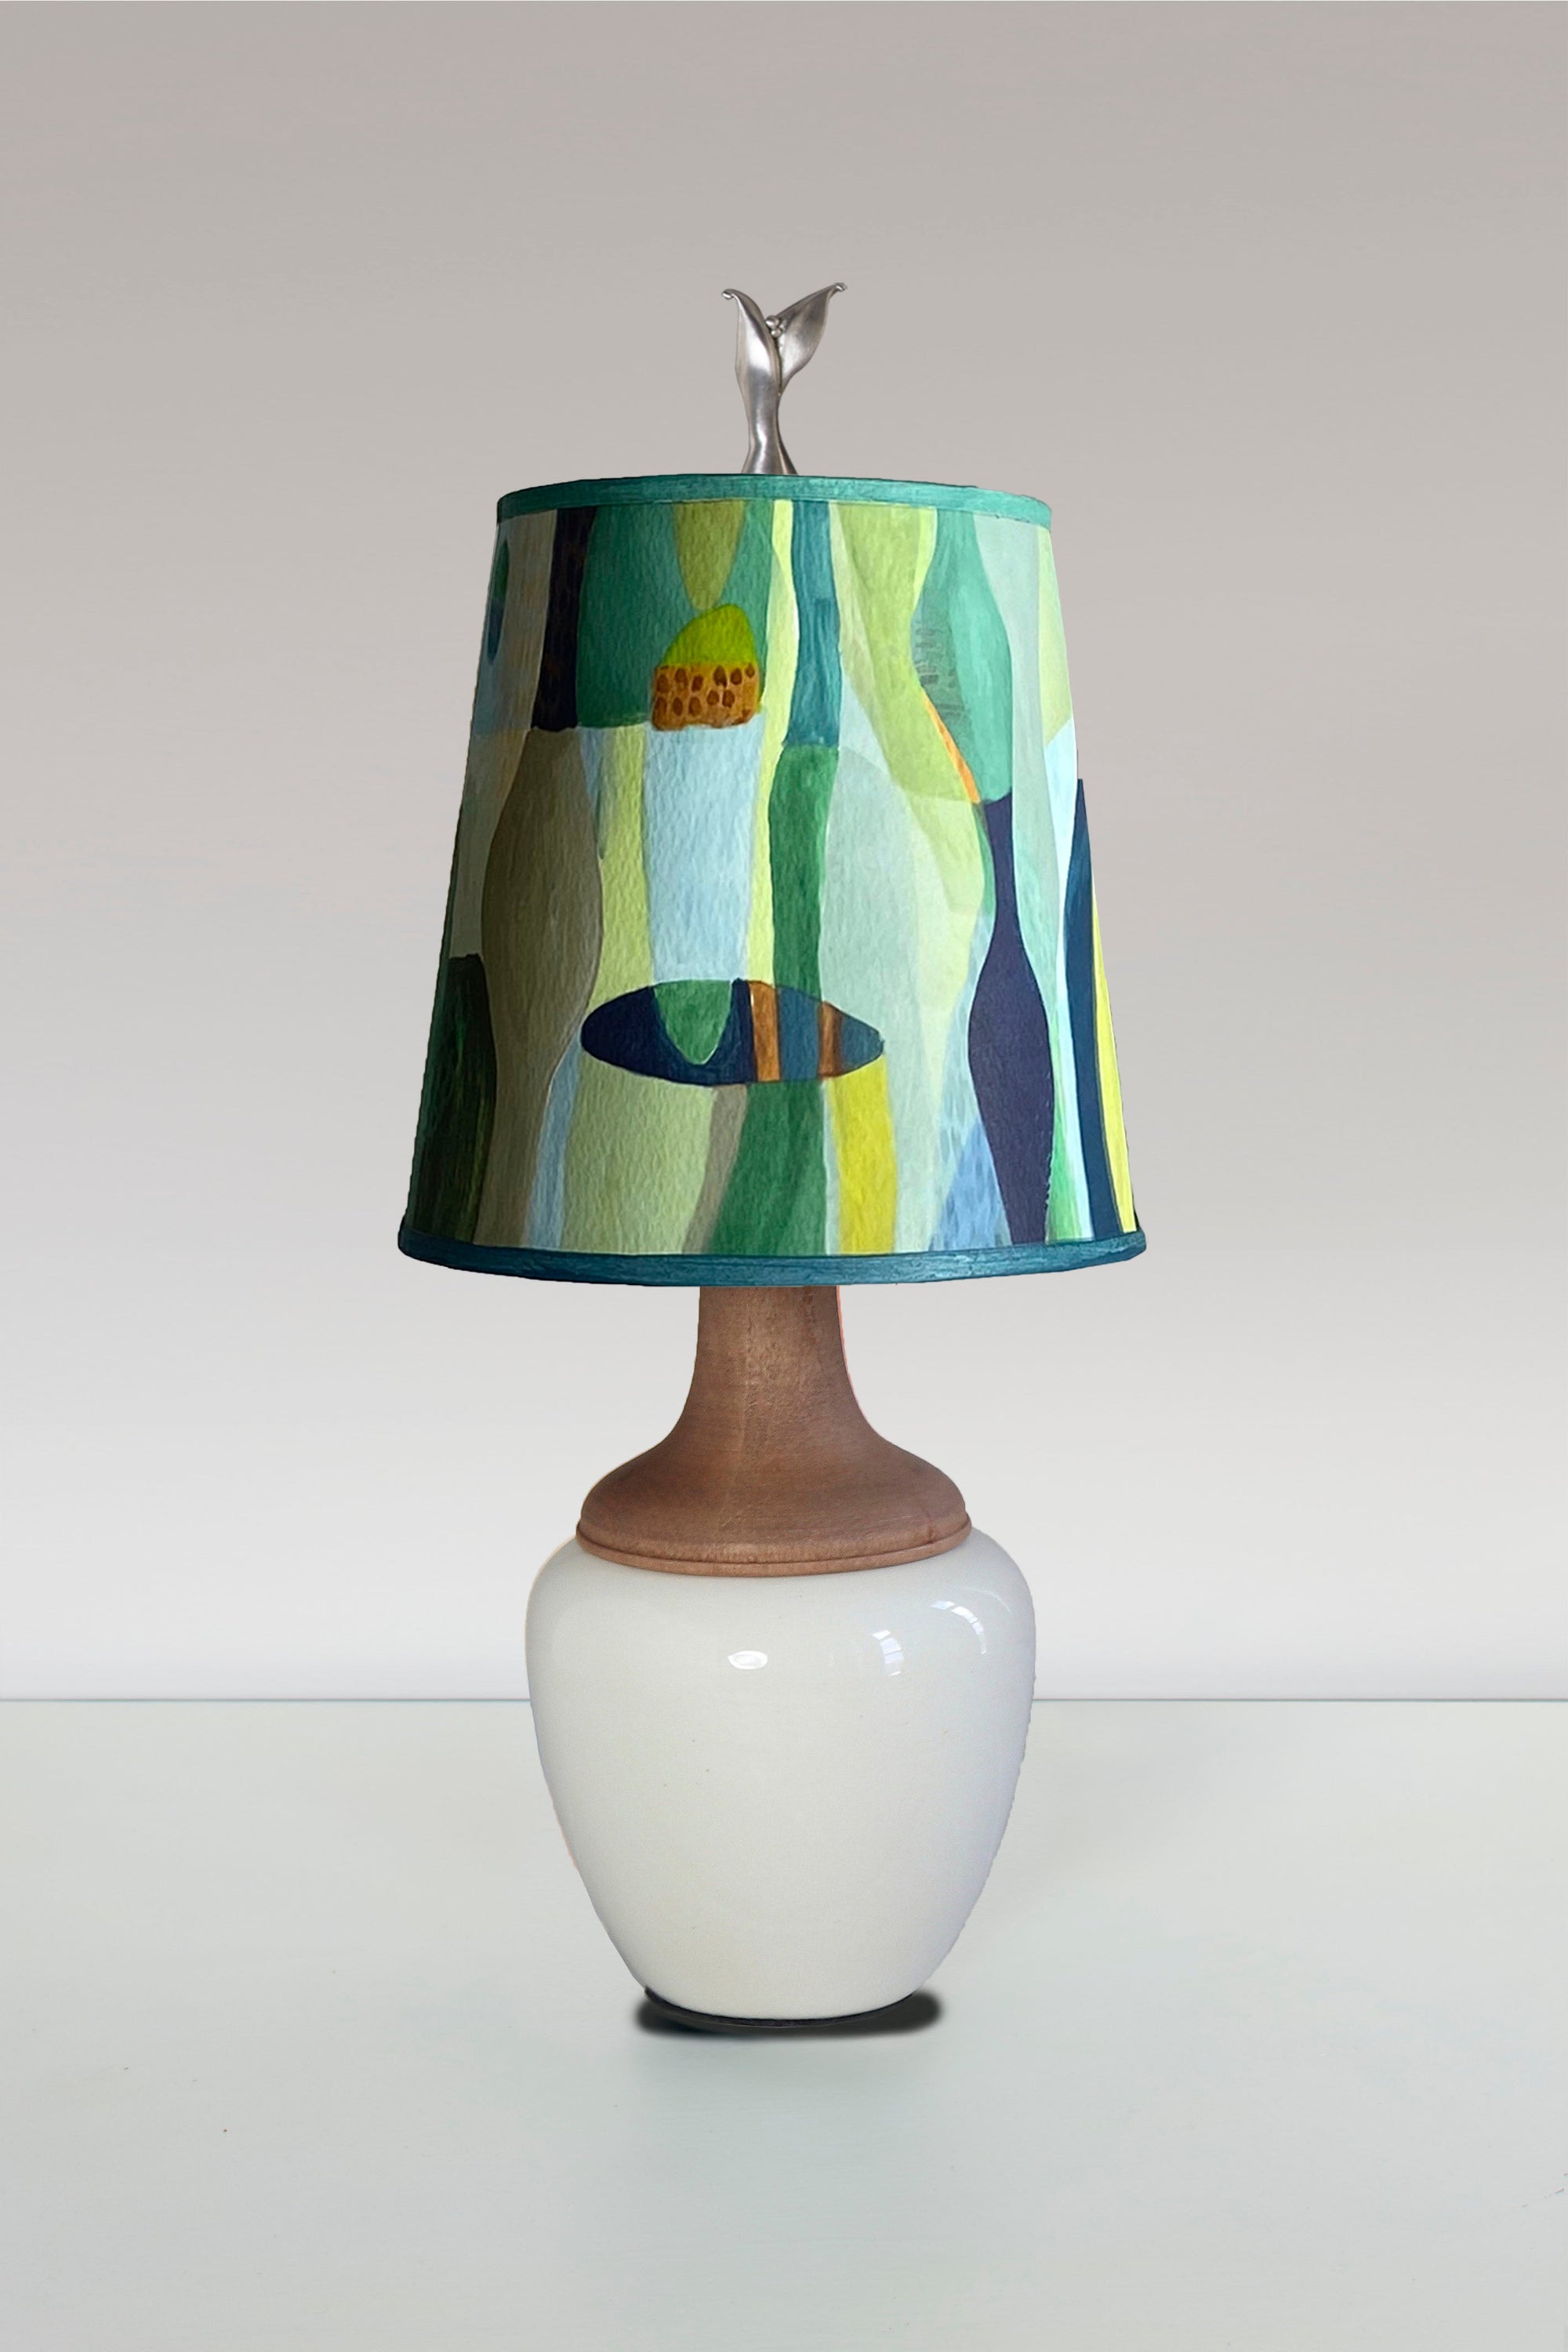 Janna Ugone & Co Table Lamp Ceramic and Maple Table Lamp in Ivory Gloss with Small Drum Shade in Riviera in Citrus